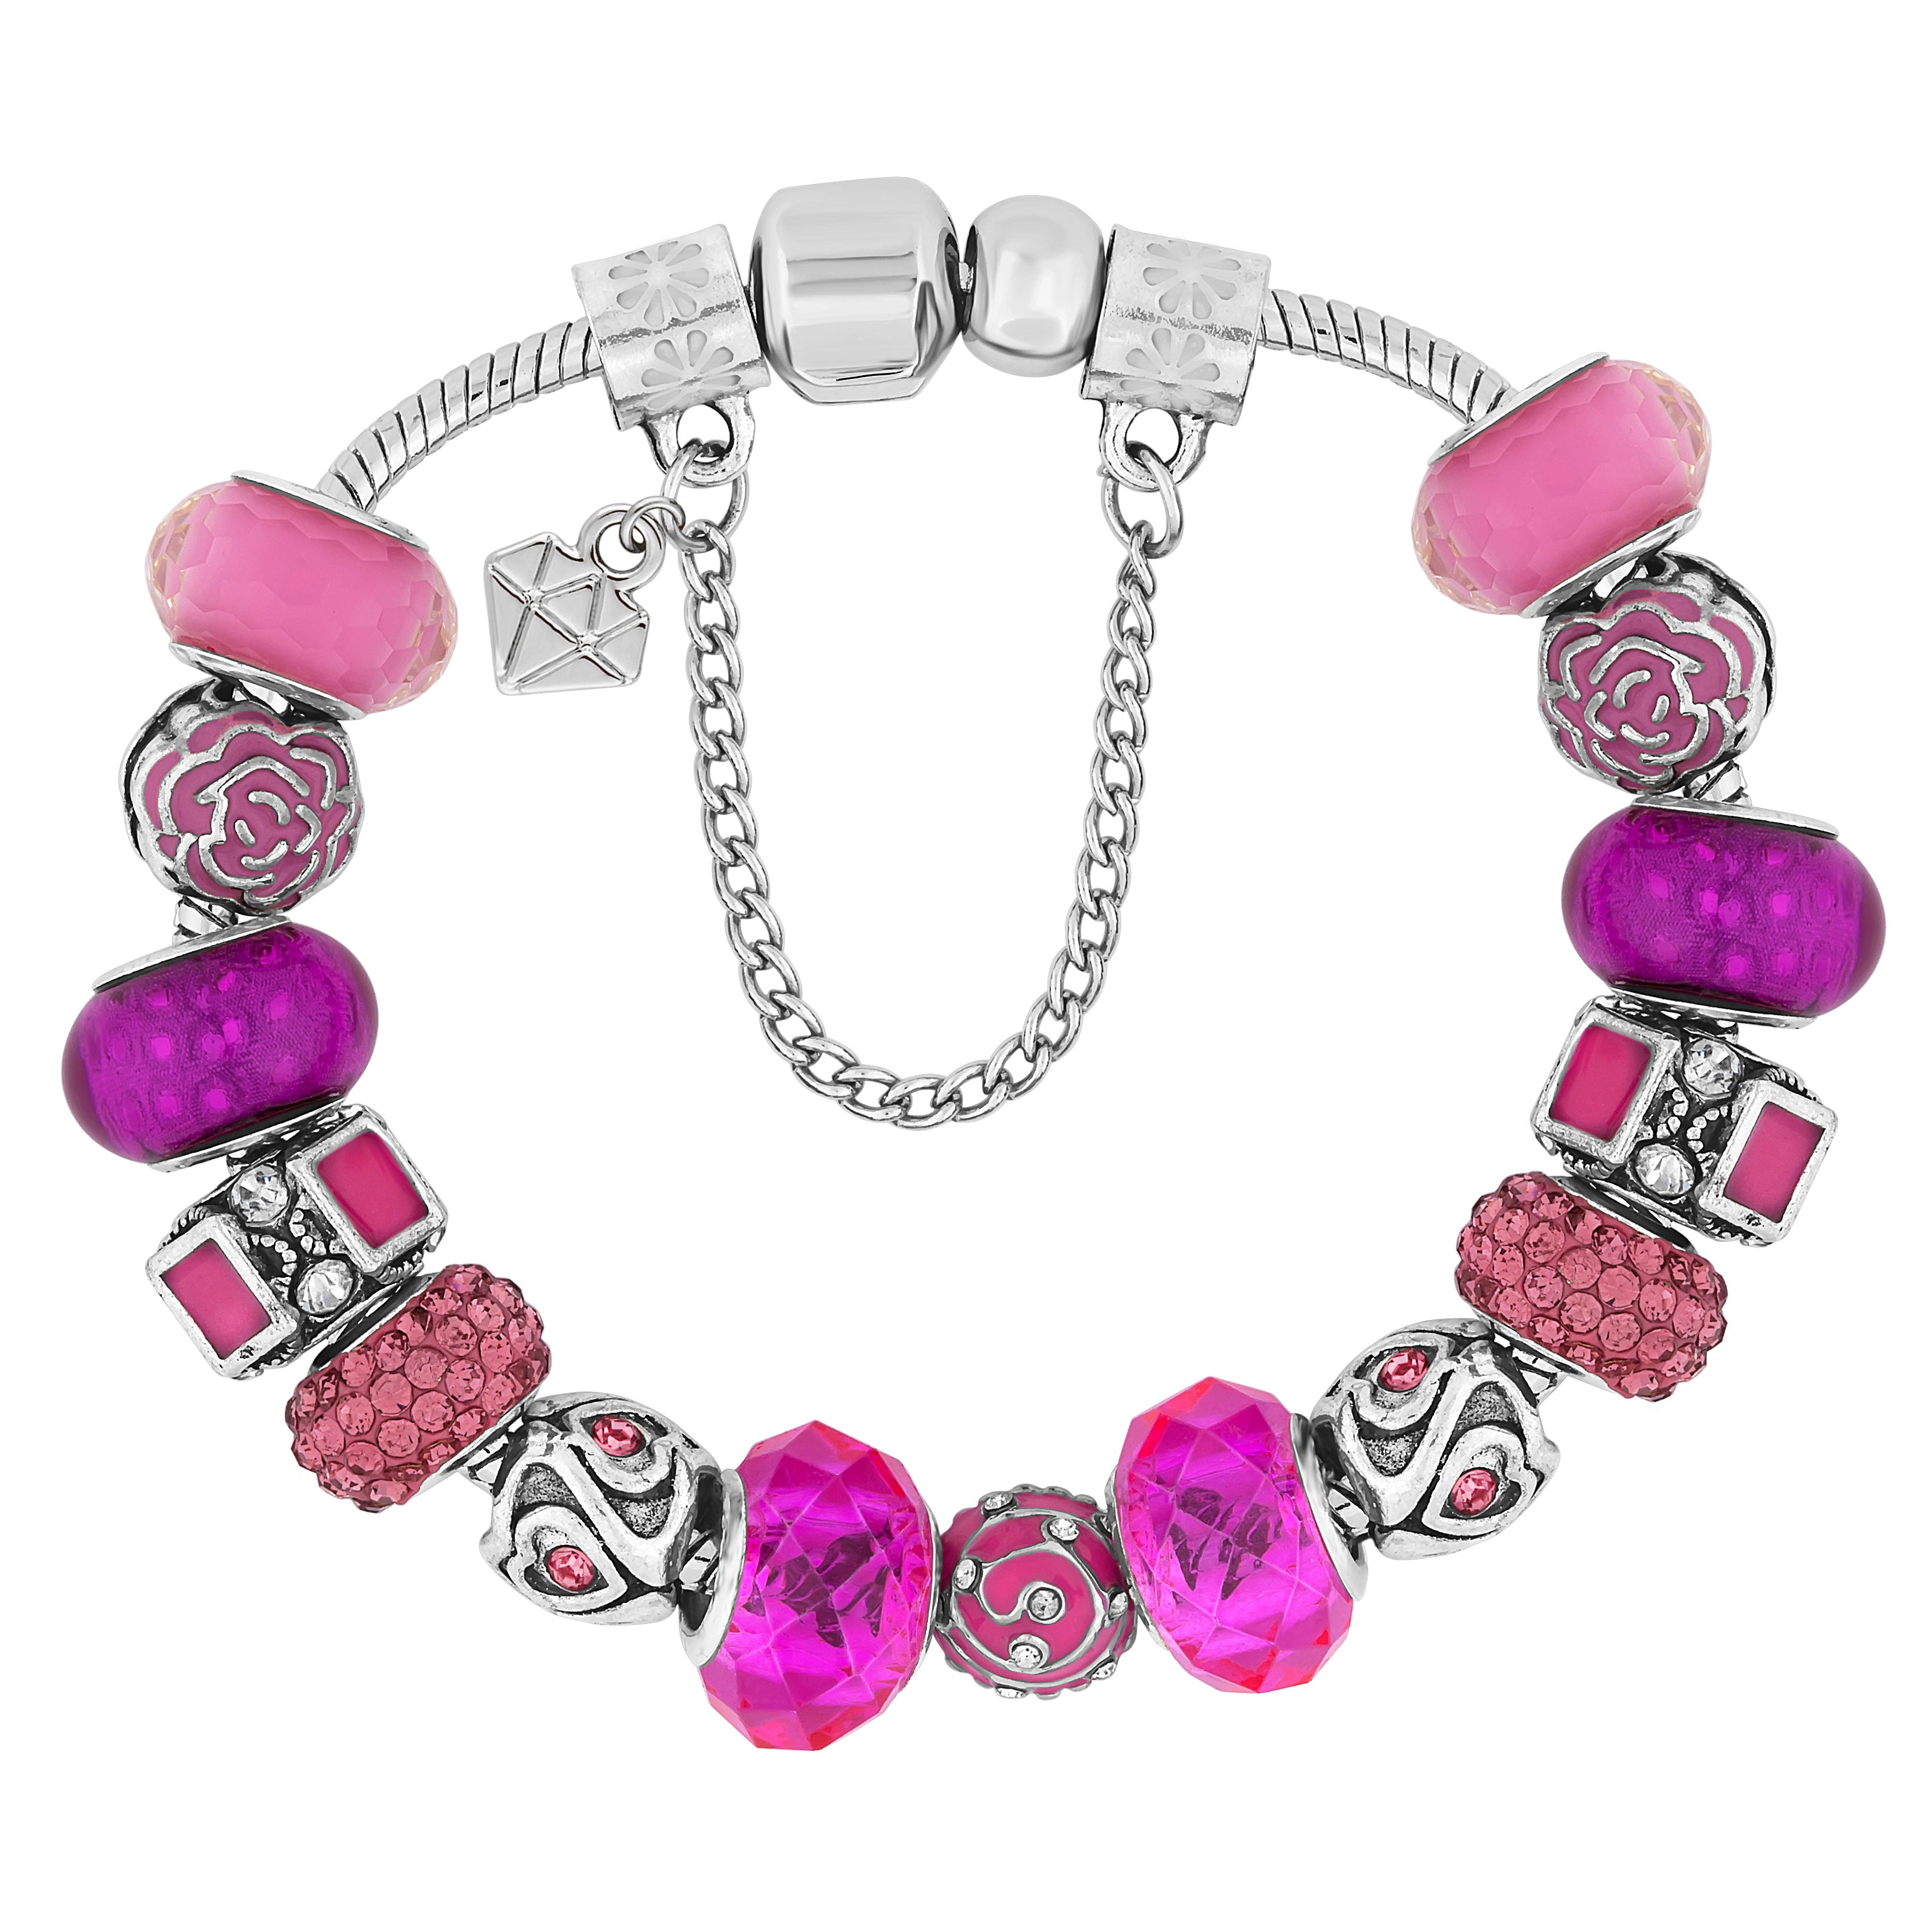 Charm Bracelet with Pink Charms